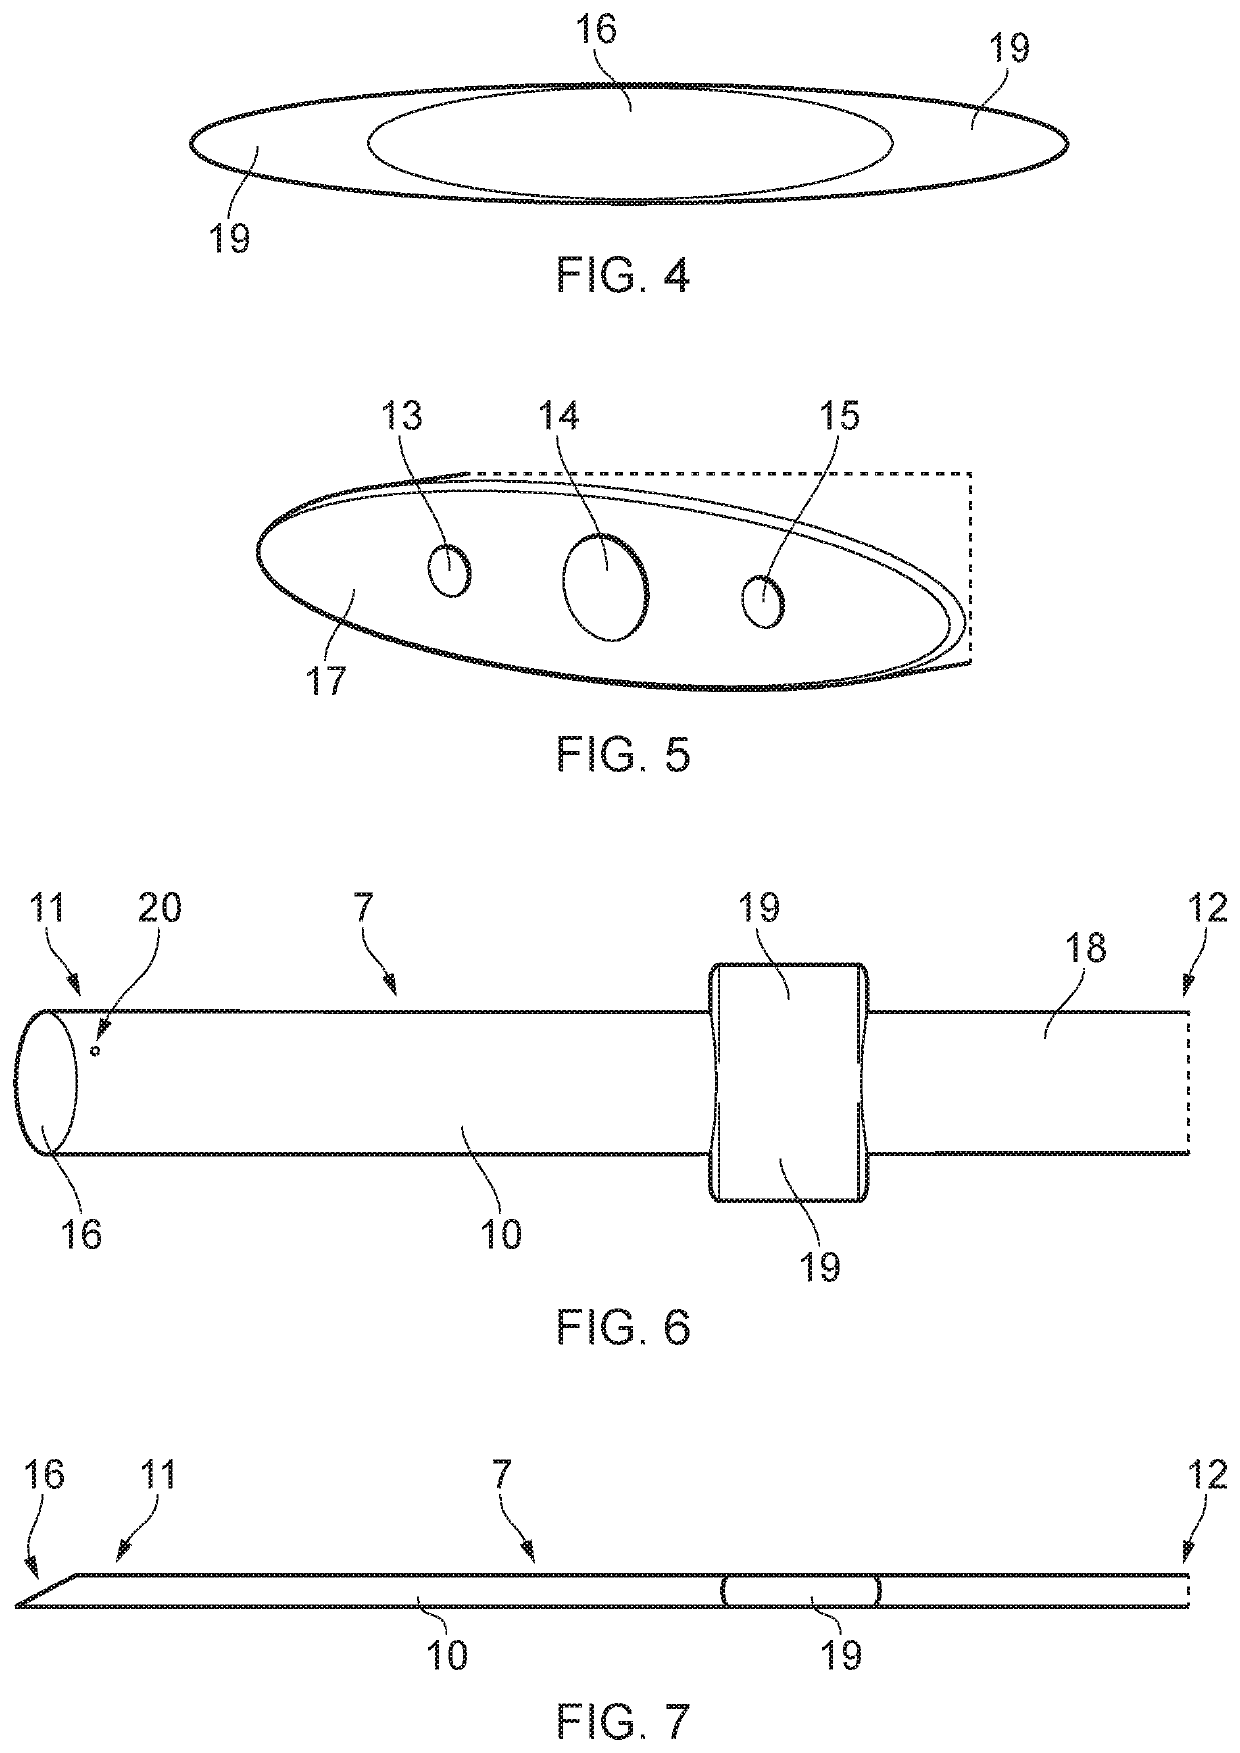 Drainage device and methods